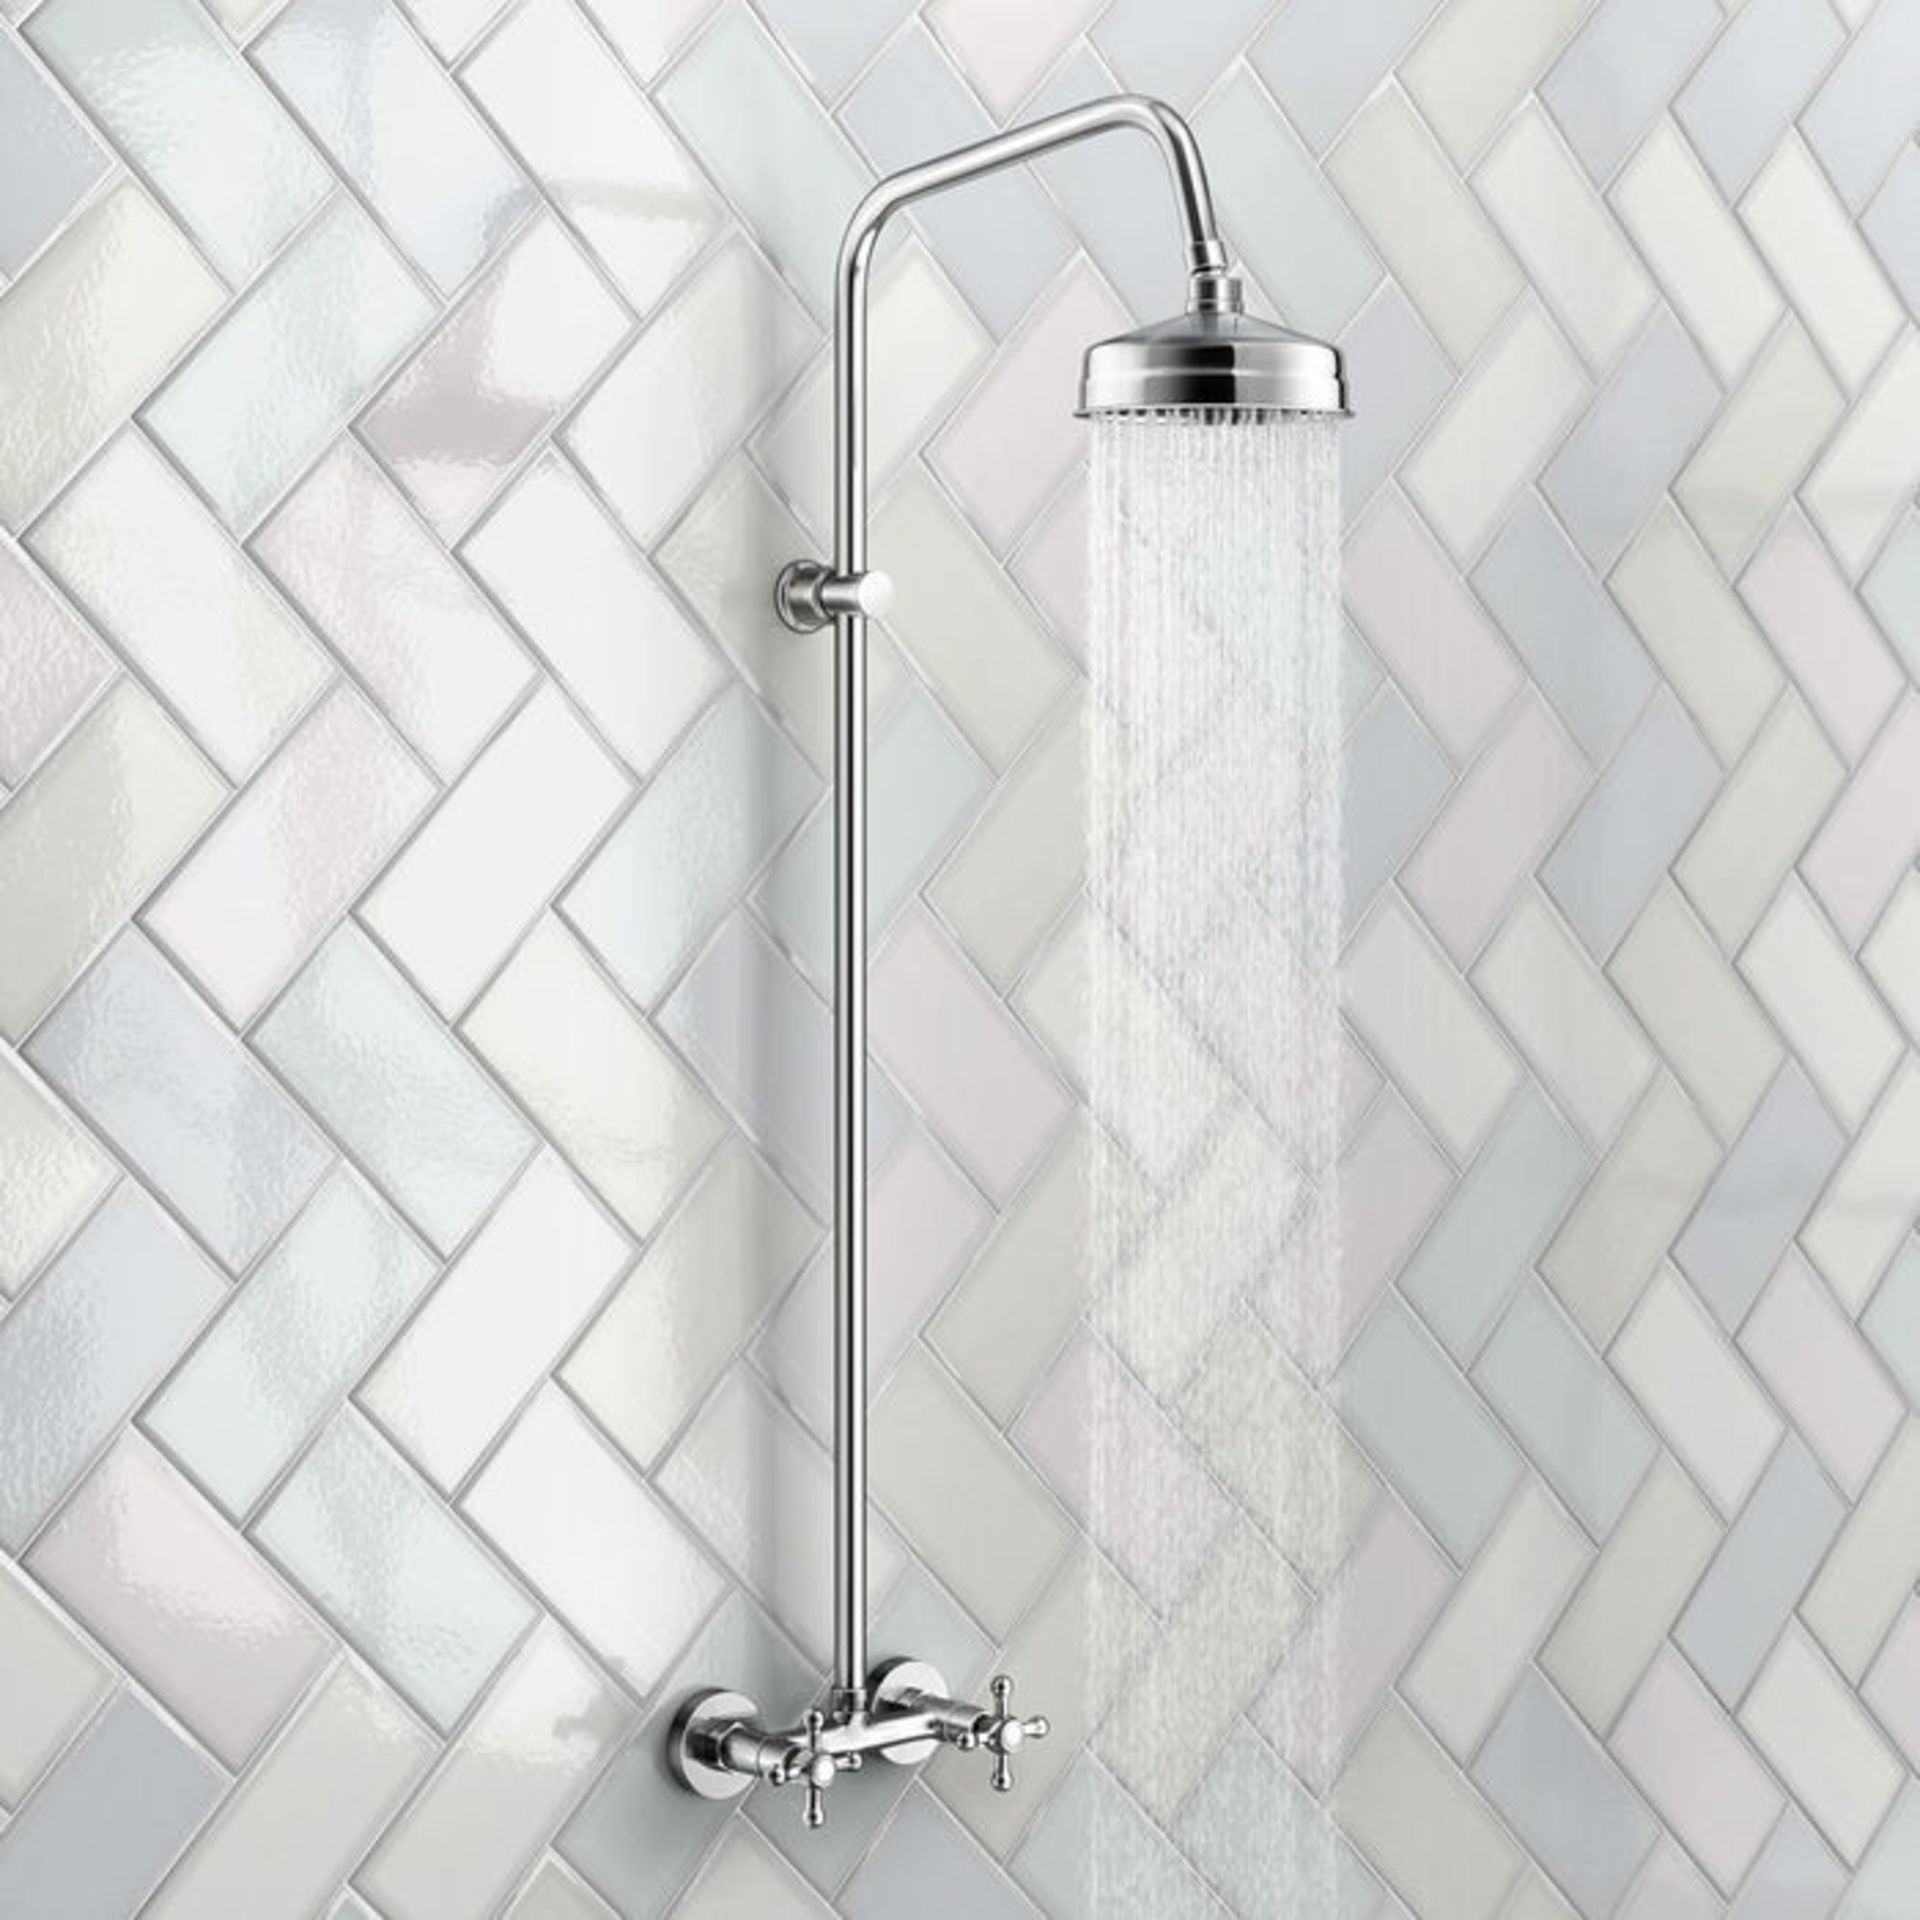 (TS211) Traditional Exposed Shower Medium Head. Exposed design makes for a statement piece